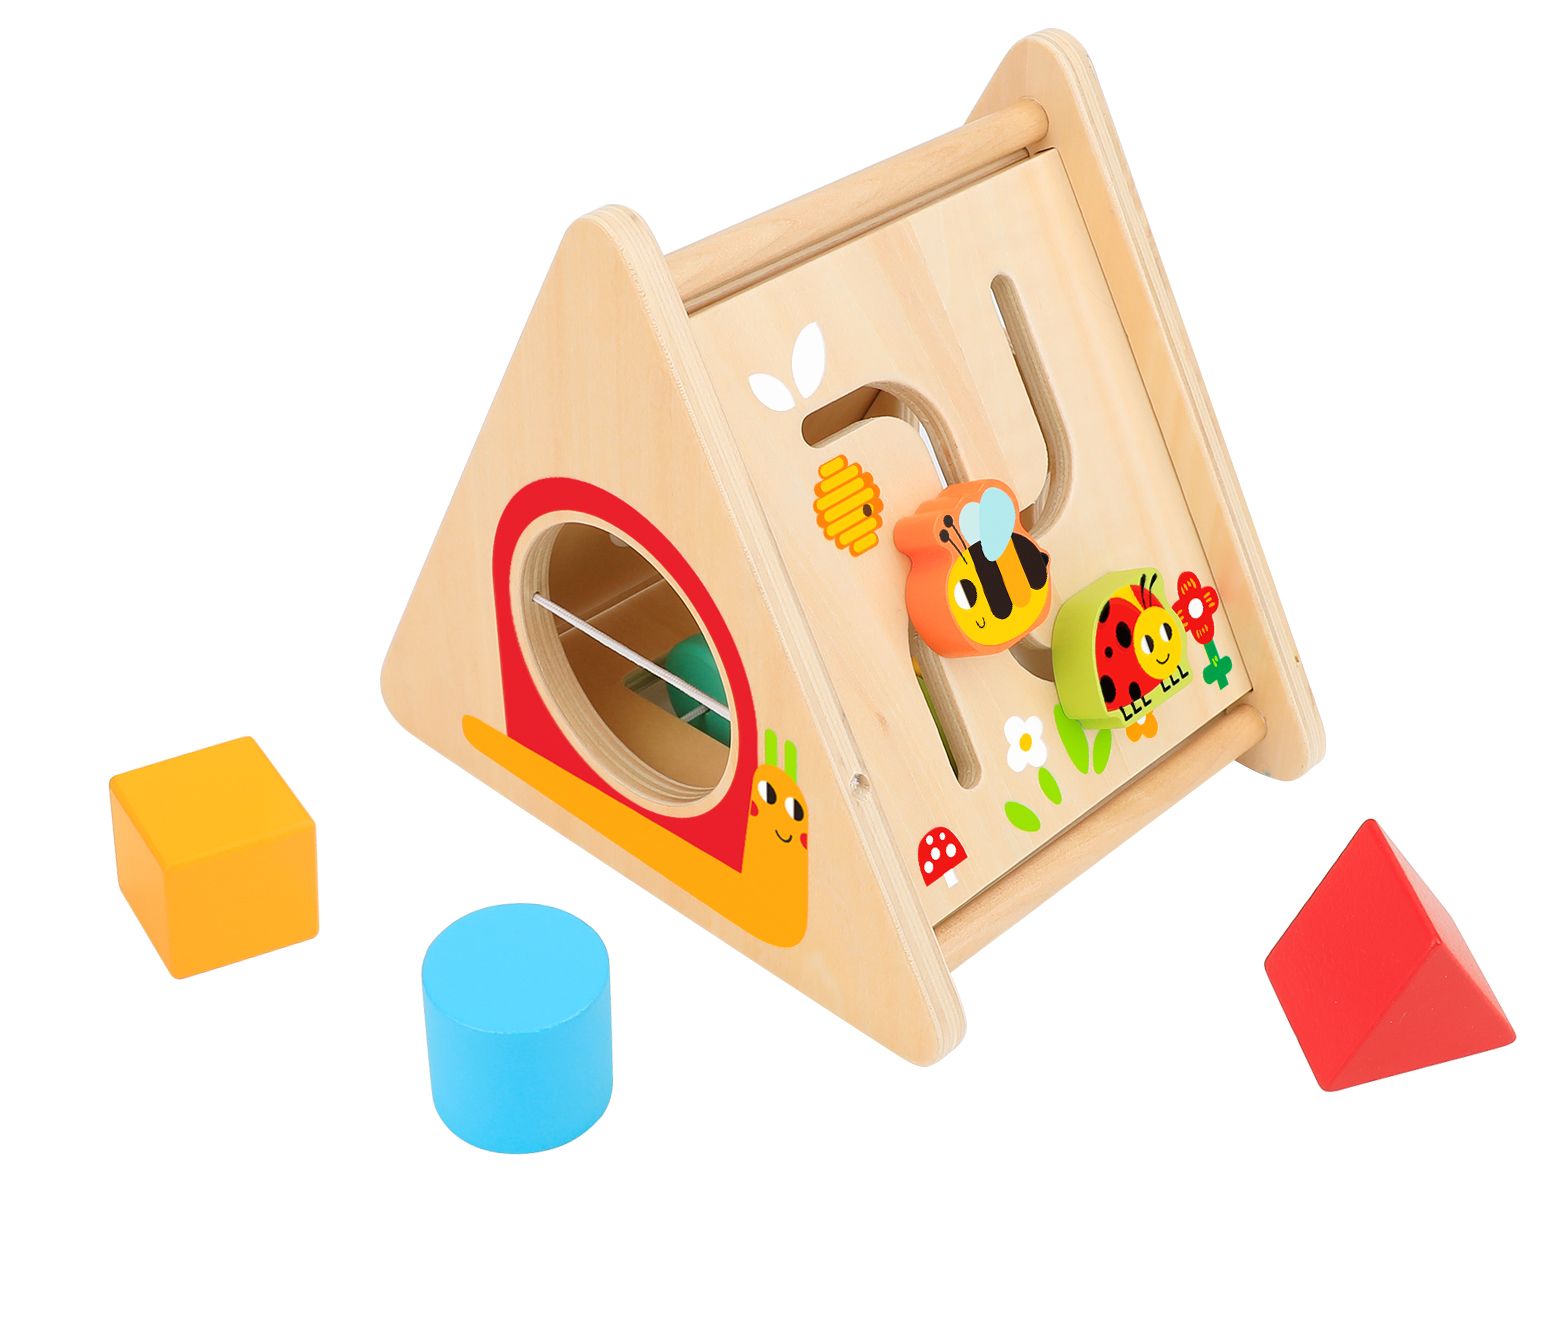 Tooky Toys - Wooden Activity Triangle Toy - Wooden Playsets